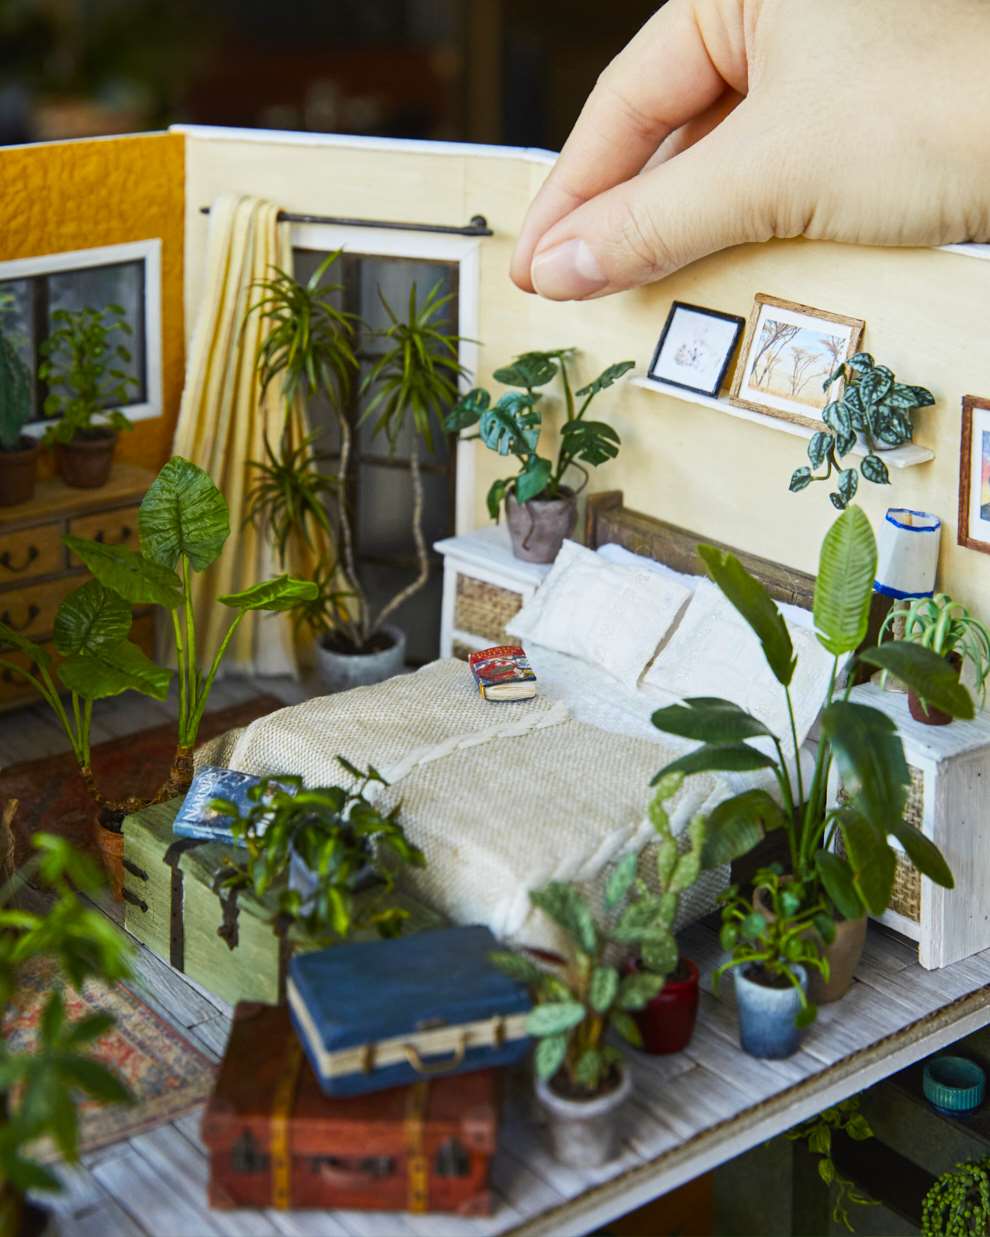 Hannah Lemon, Miniature detailed set design. Bedroom with  a double bed surrounded by houseplants and botanicals. Tiny sculpture made from air drying clay, paper, wood, paint, mixed media.